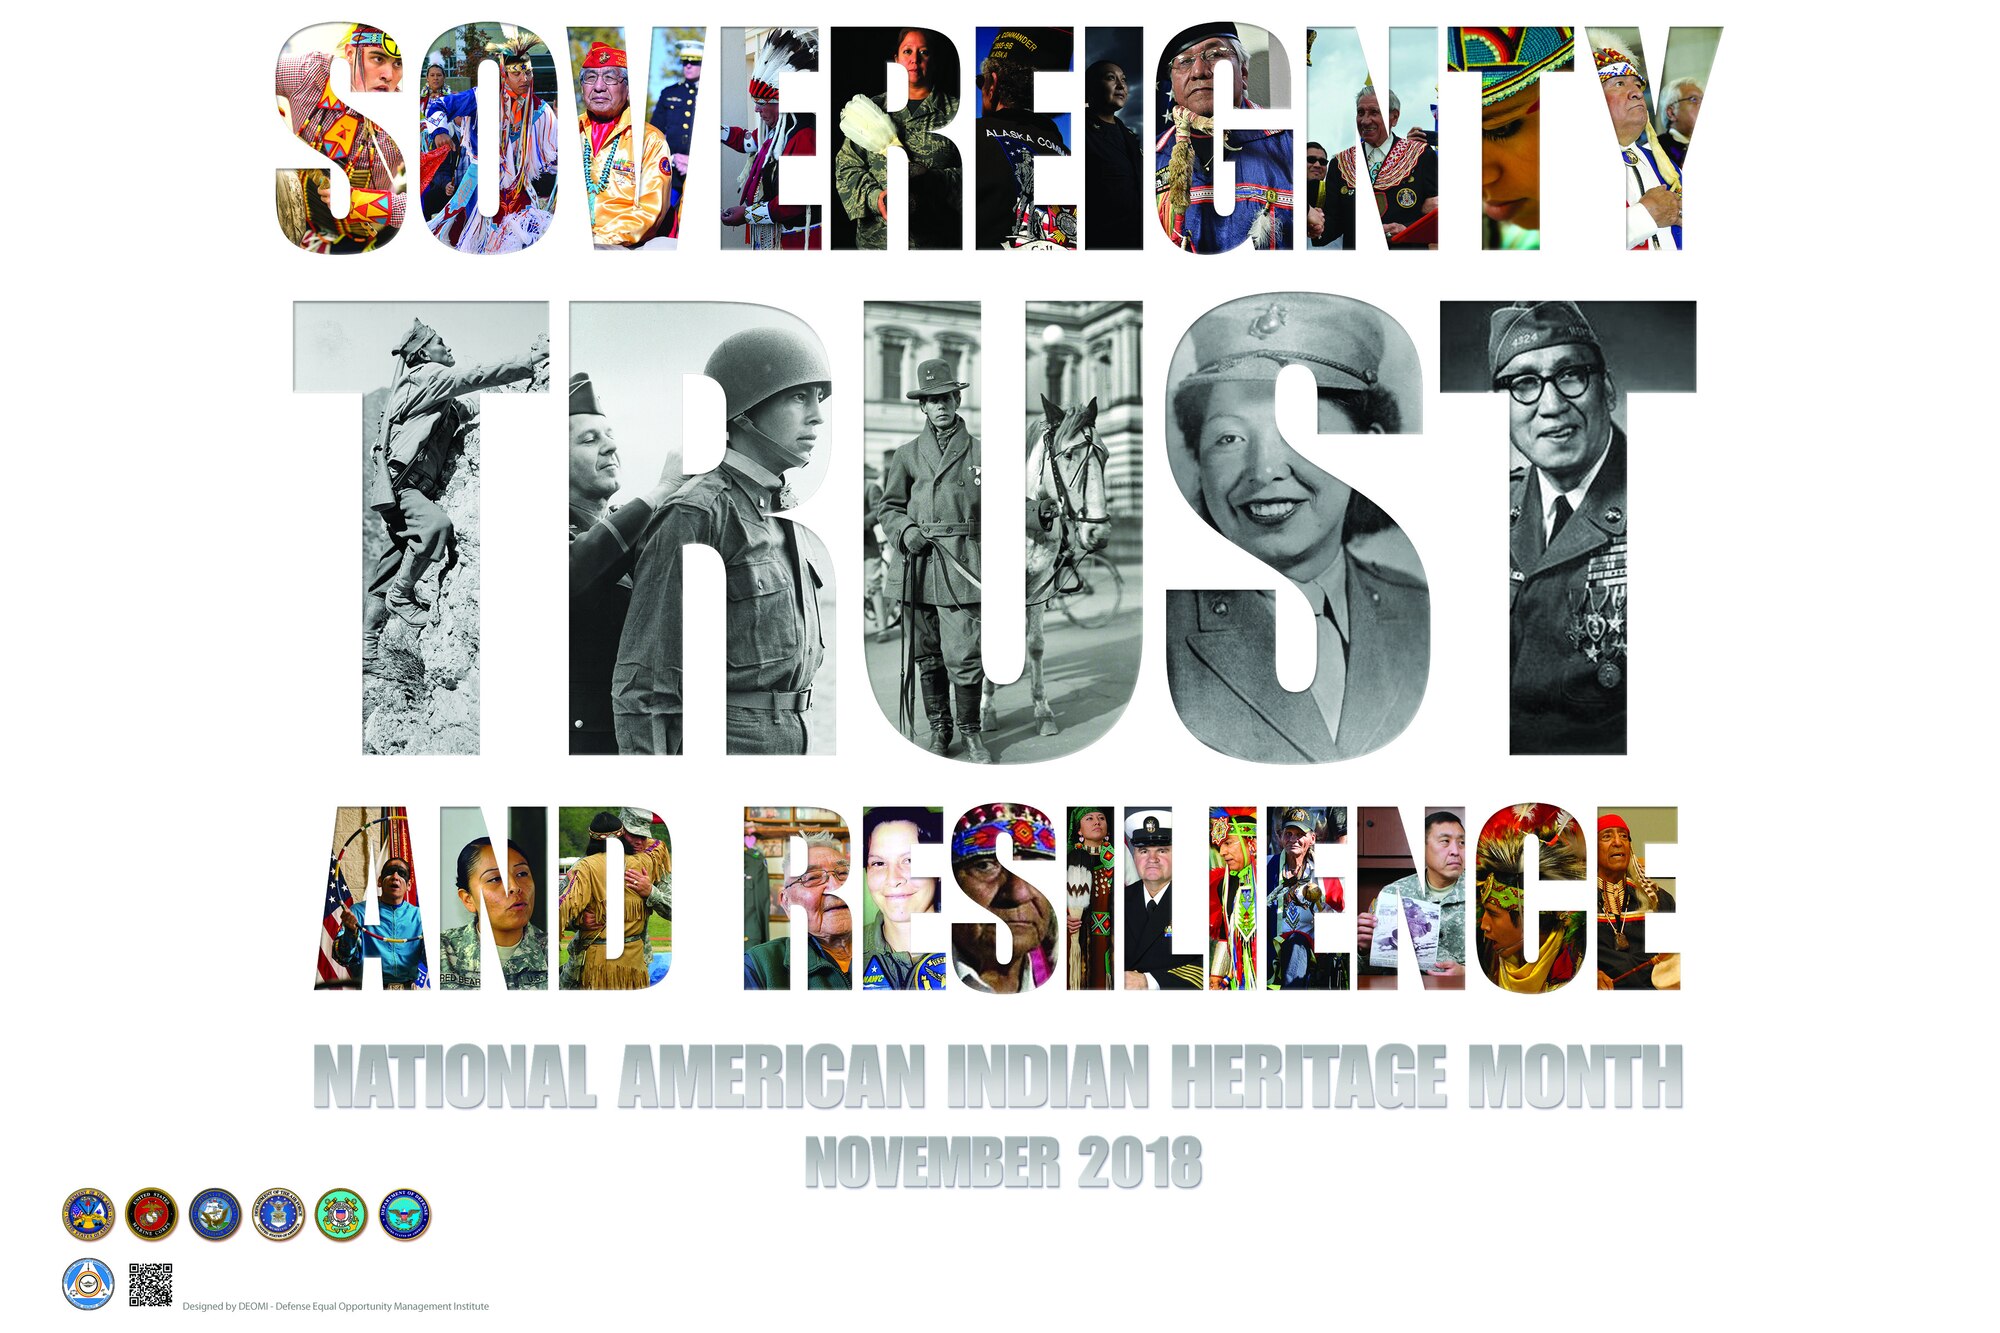 The theme for 2018 National American Indian Heritage month is “Sovereignty, Trust and Resilience.” This month’s poster highlights the diversity of American Indians and Alaska Natives that comprise 567 federally-recognized tribes. The photos selected represent past and present service members from all branches of military service who have been critical to our nation’s defense. (Observance poster by the Defense Equal Opportunity Management Institute)